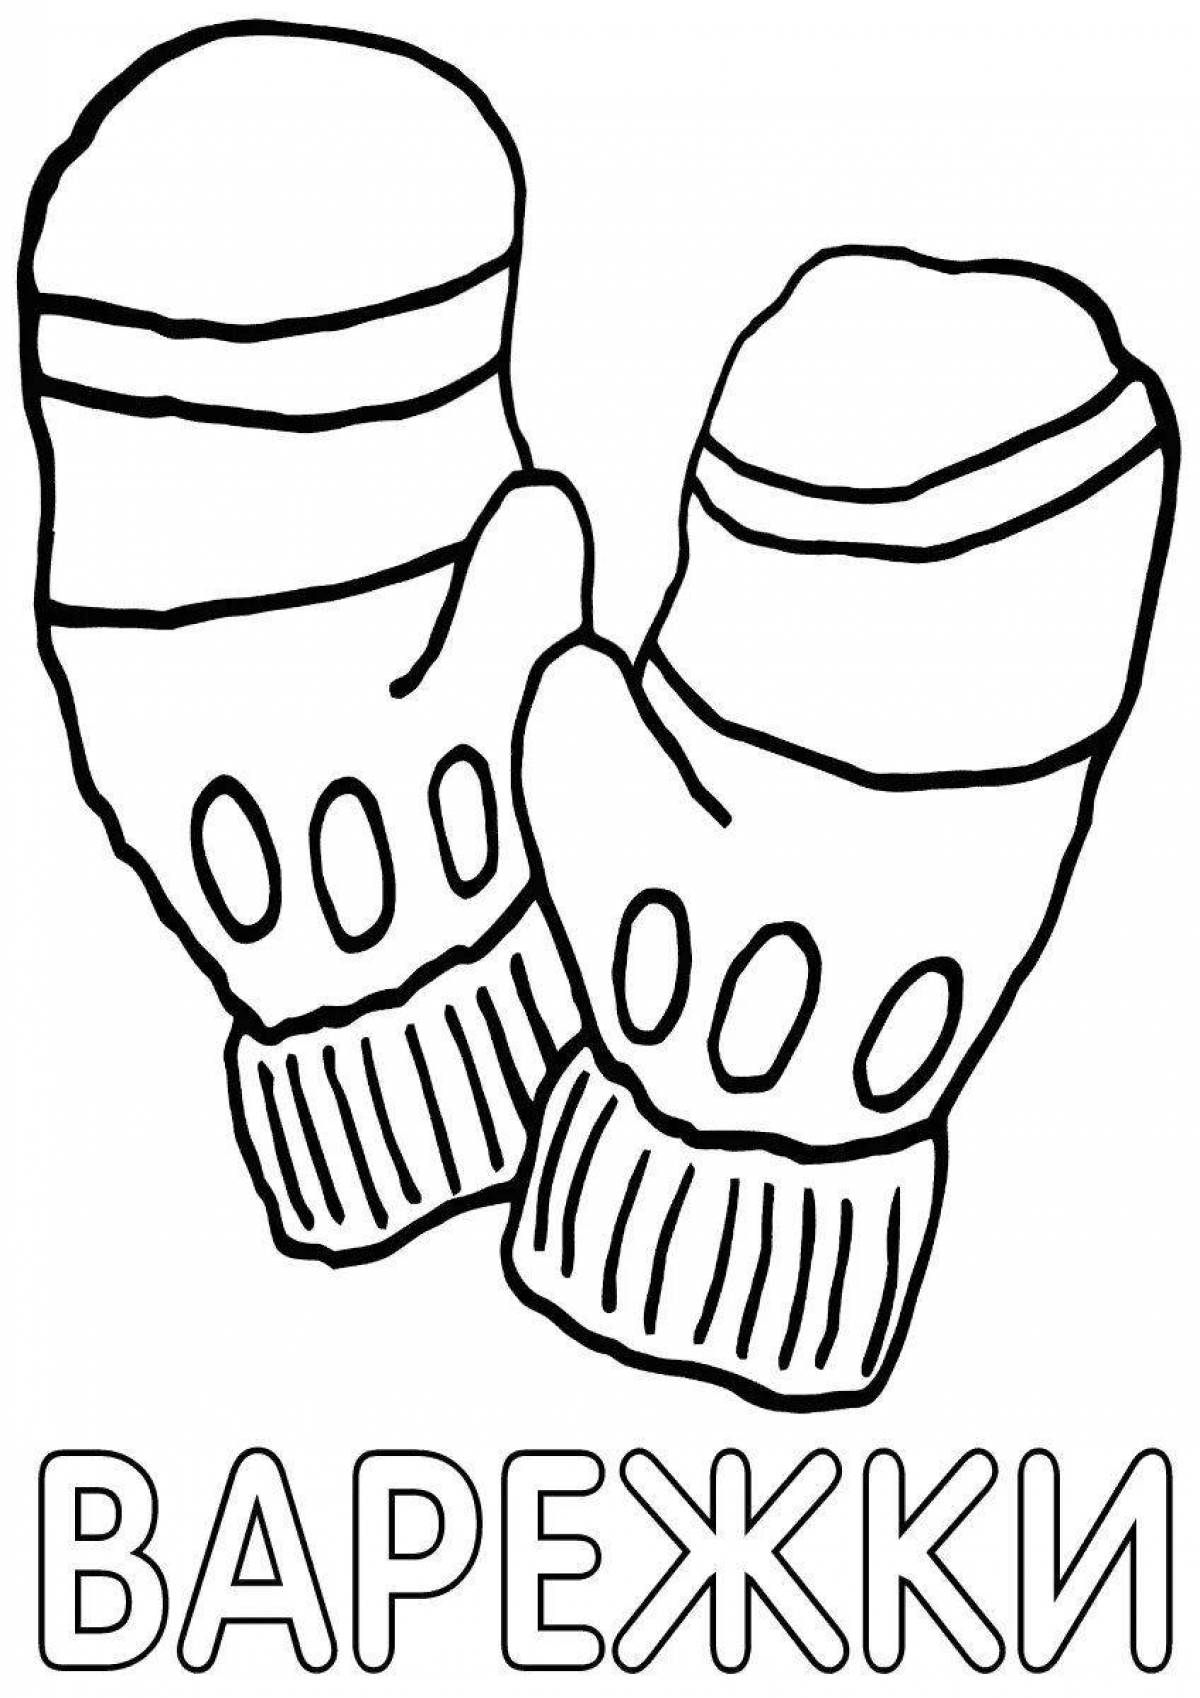 Coloring page glamor shoes